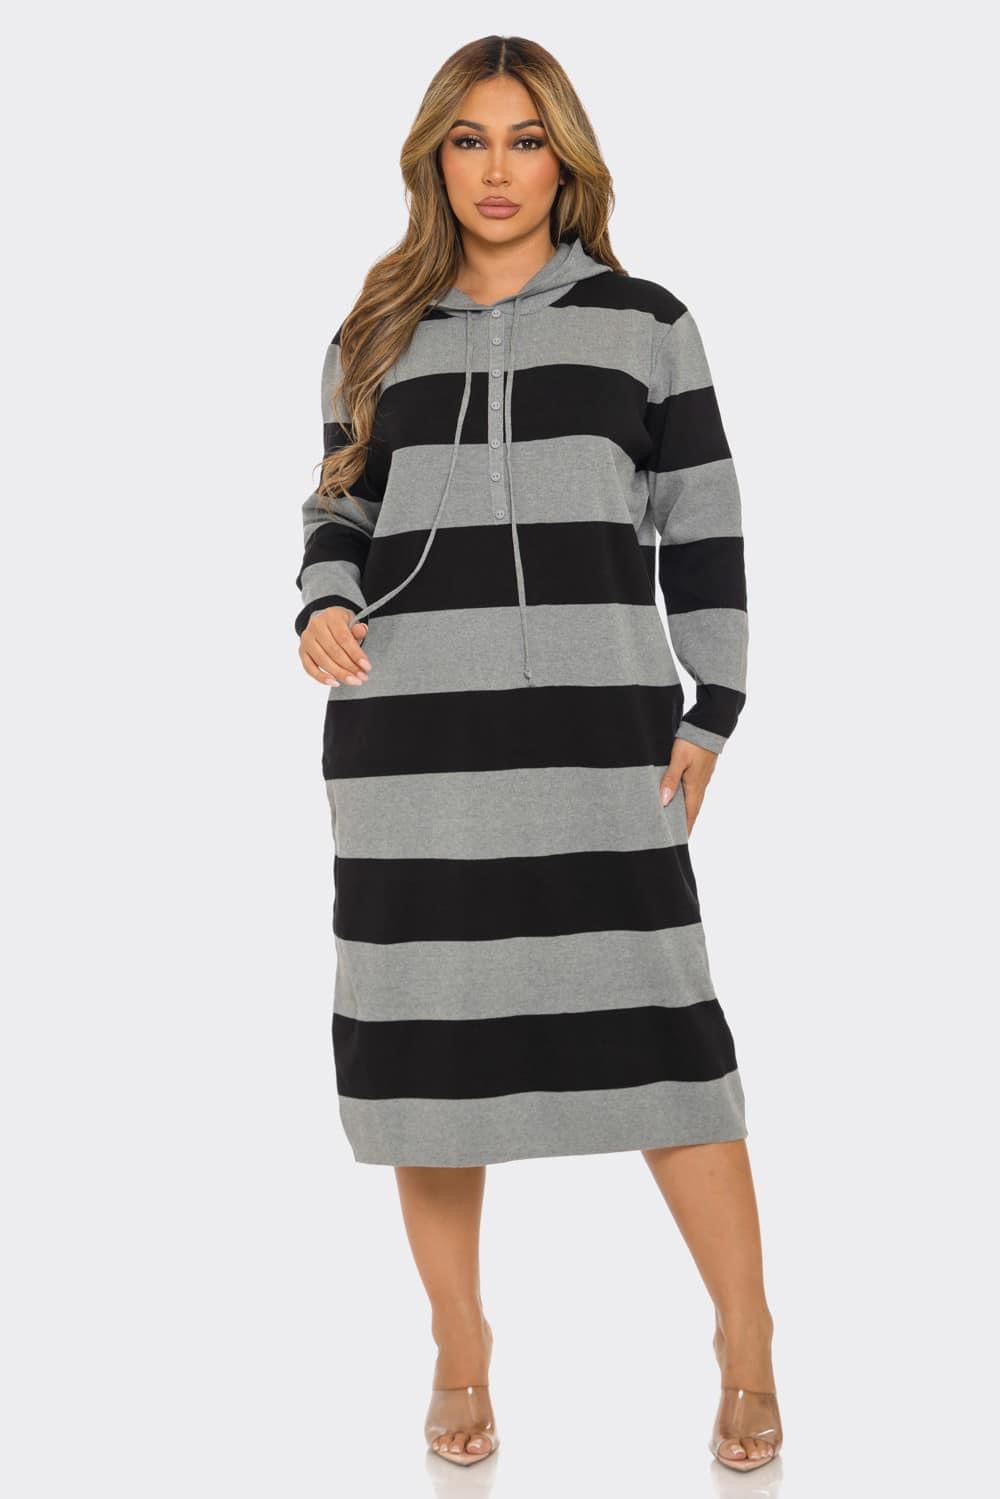 One size Knit hooded Sweater Dress